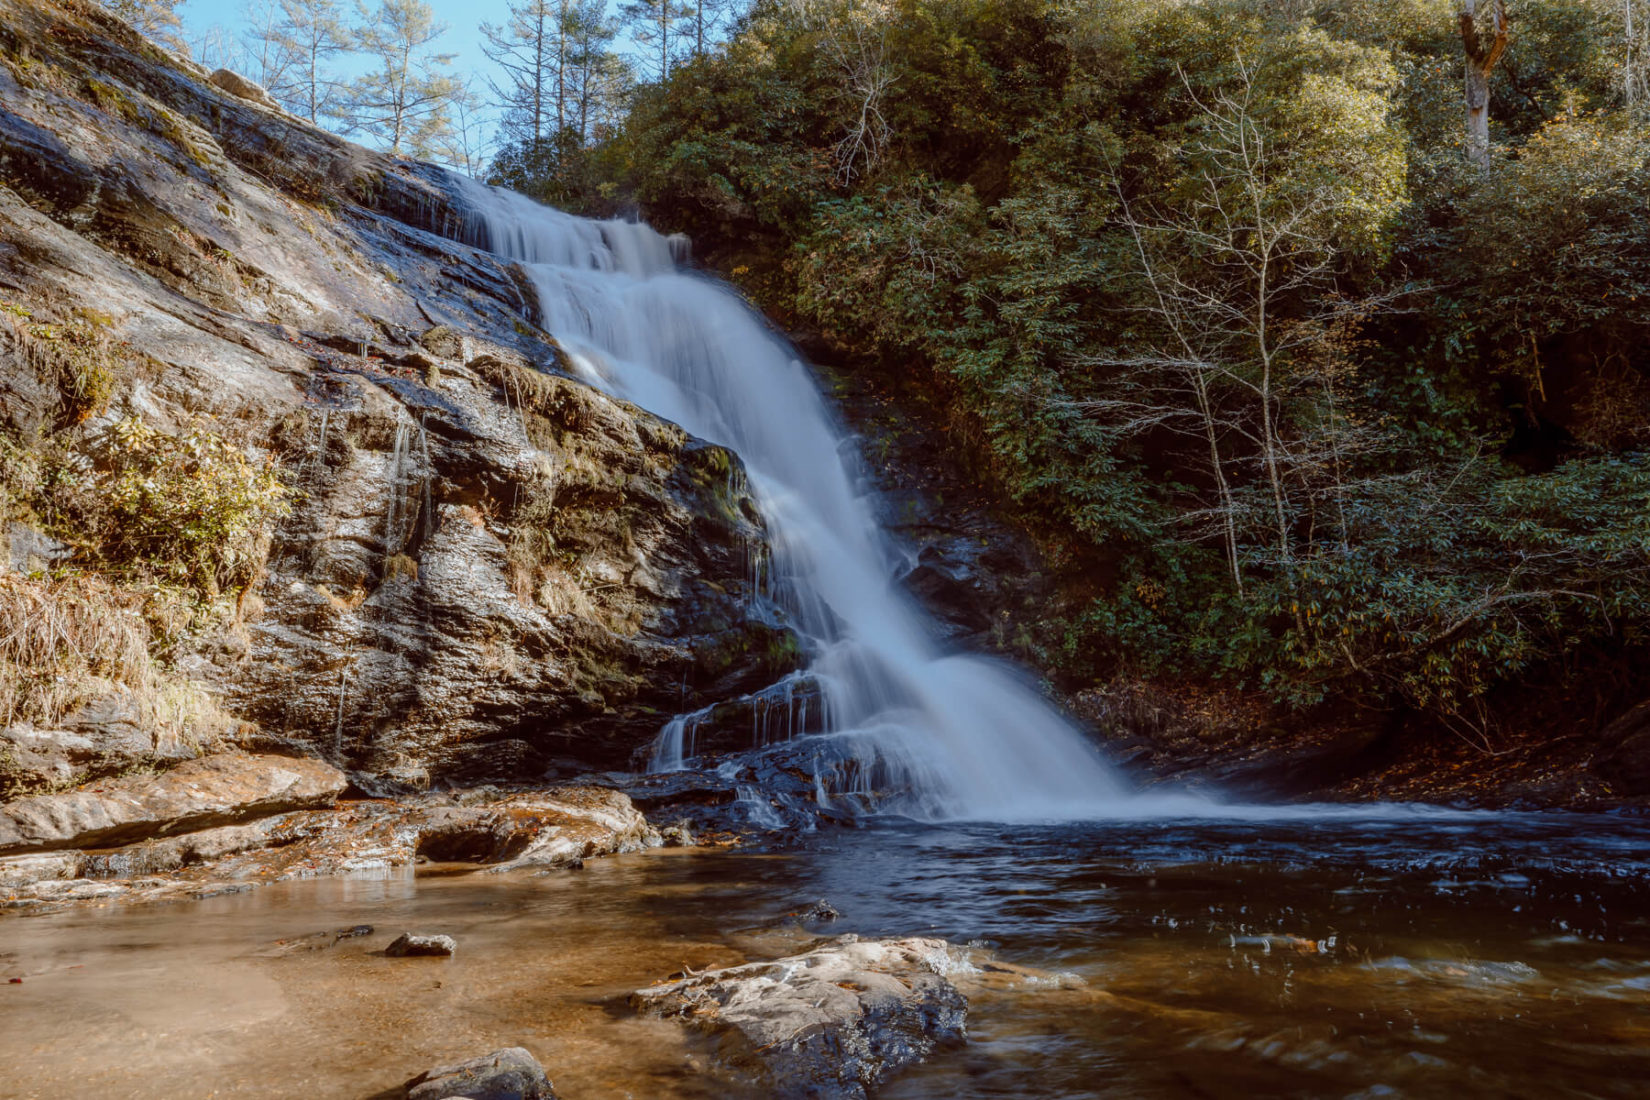 View of the waterfall and swimming hole from the base of Secret Falls 